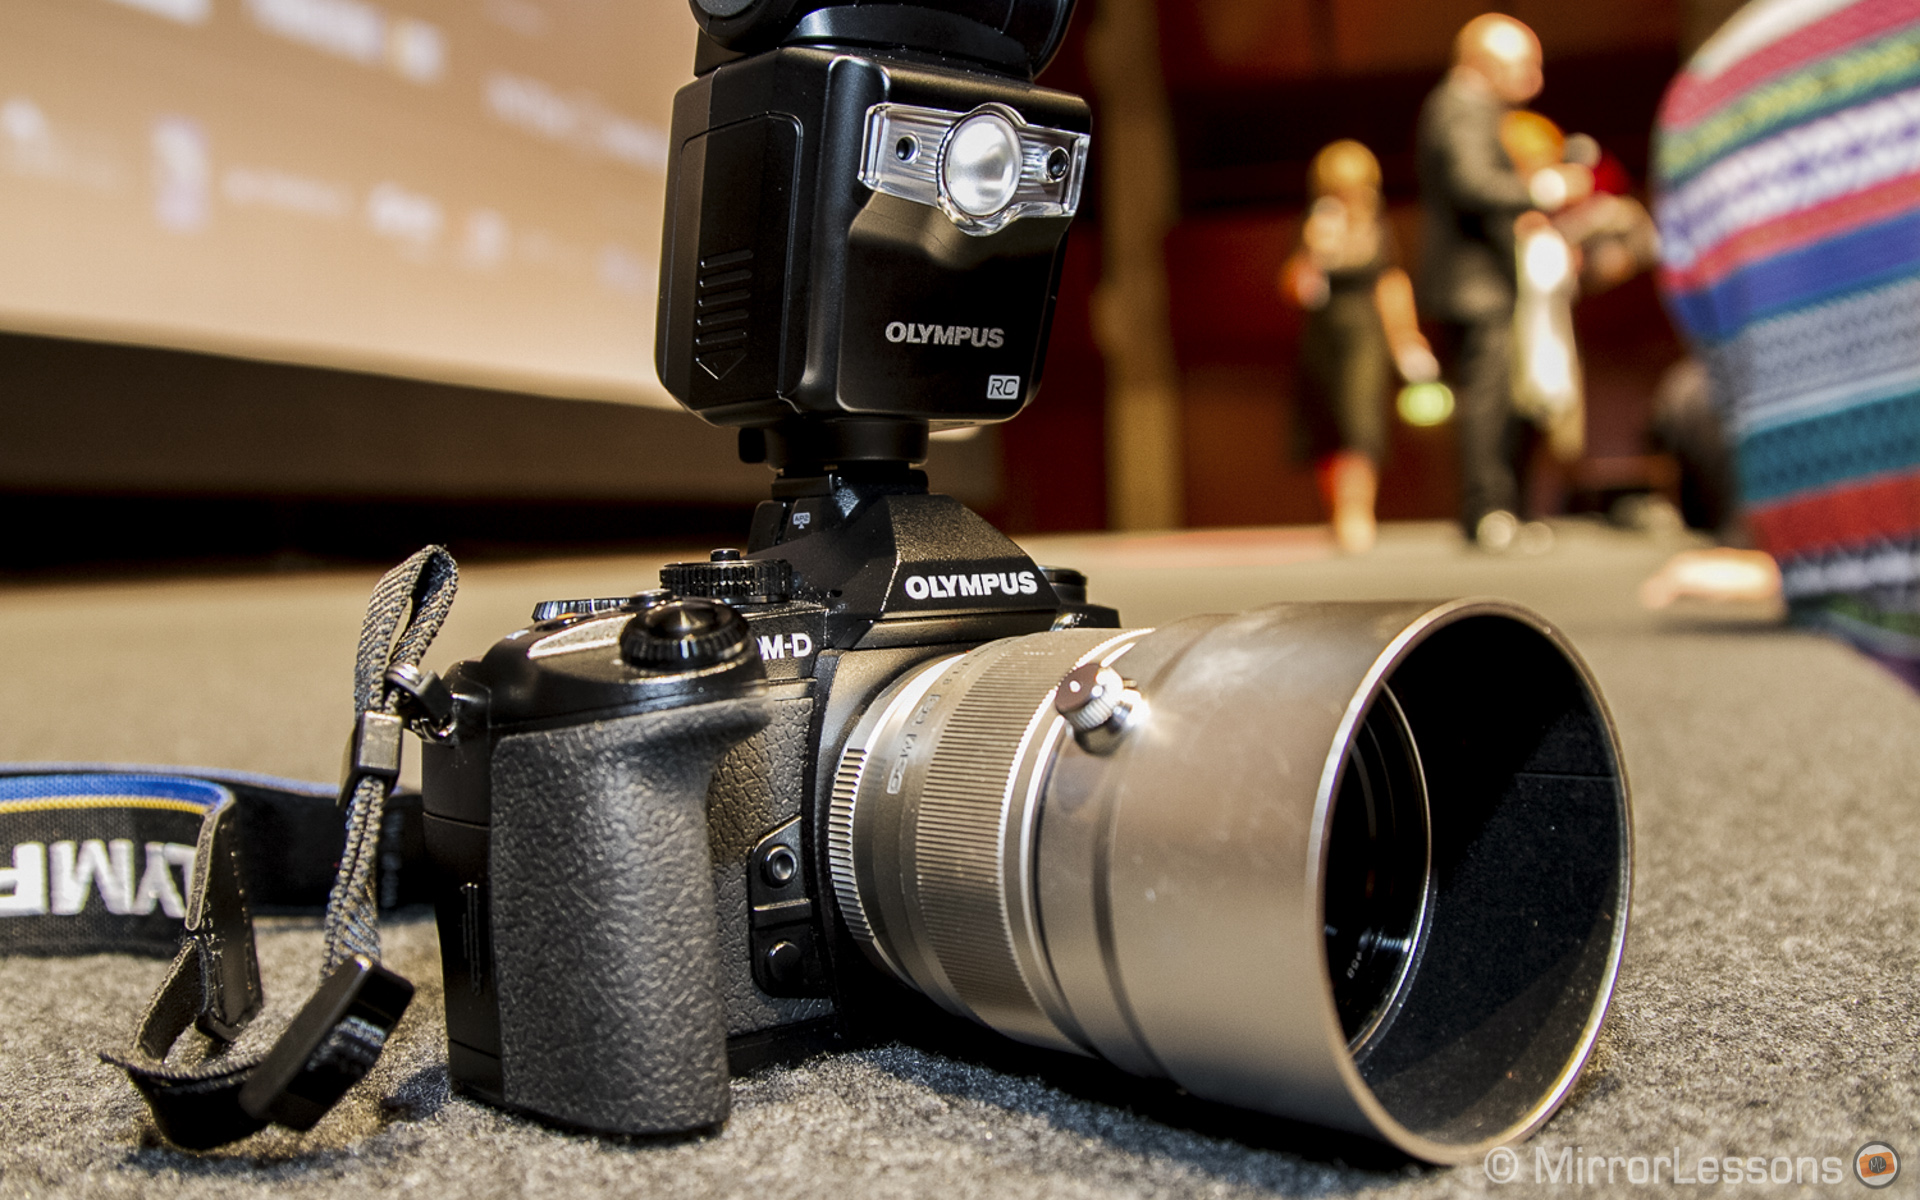 Entertainment op tijd Zaailing Mirrorless on the Job: One week with the Olympus OM-D E-M1